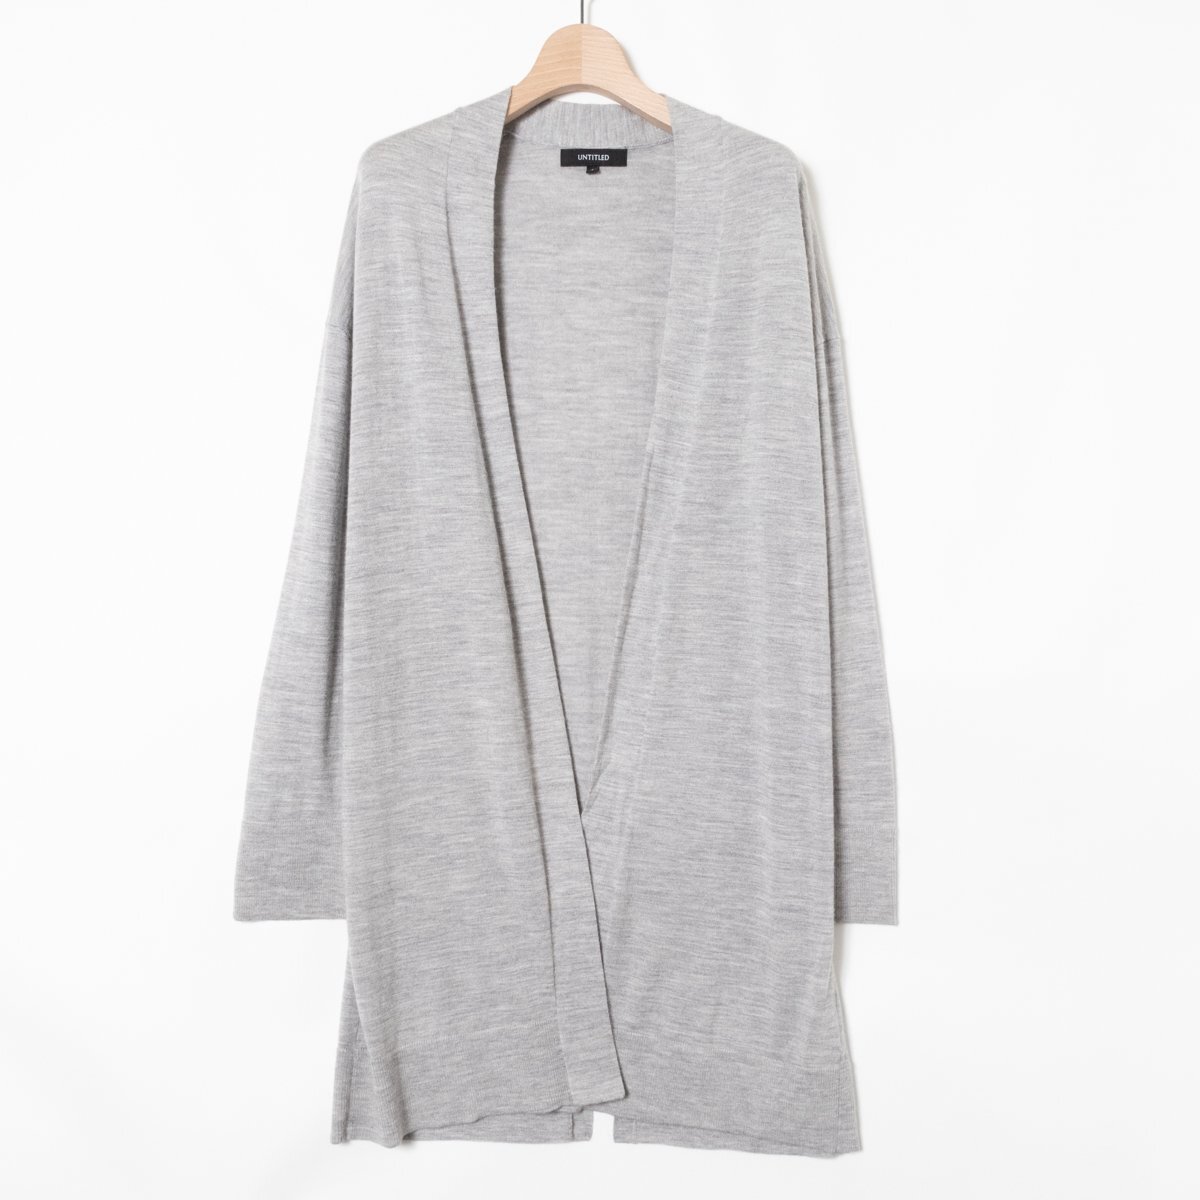 UNTITLED Untitled long knitted cardigan feather woven long sleeve plain no- button 2 wool gray grey beautiful . casual simple woman clothes 